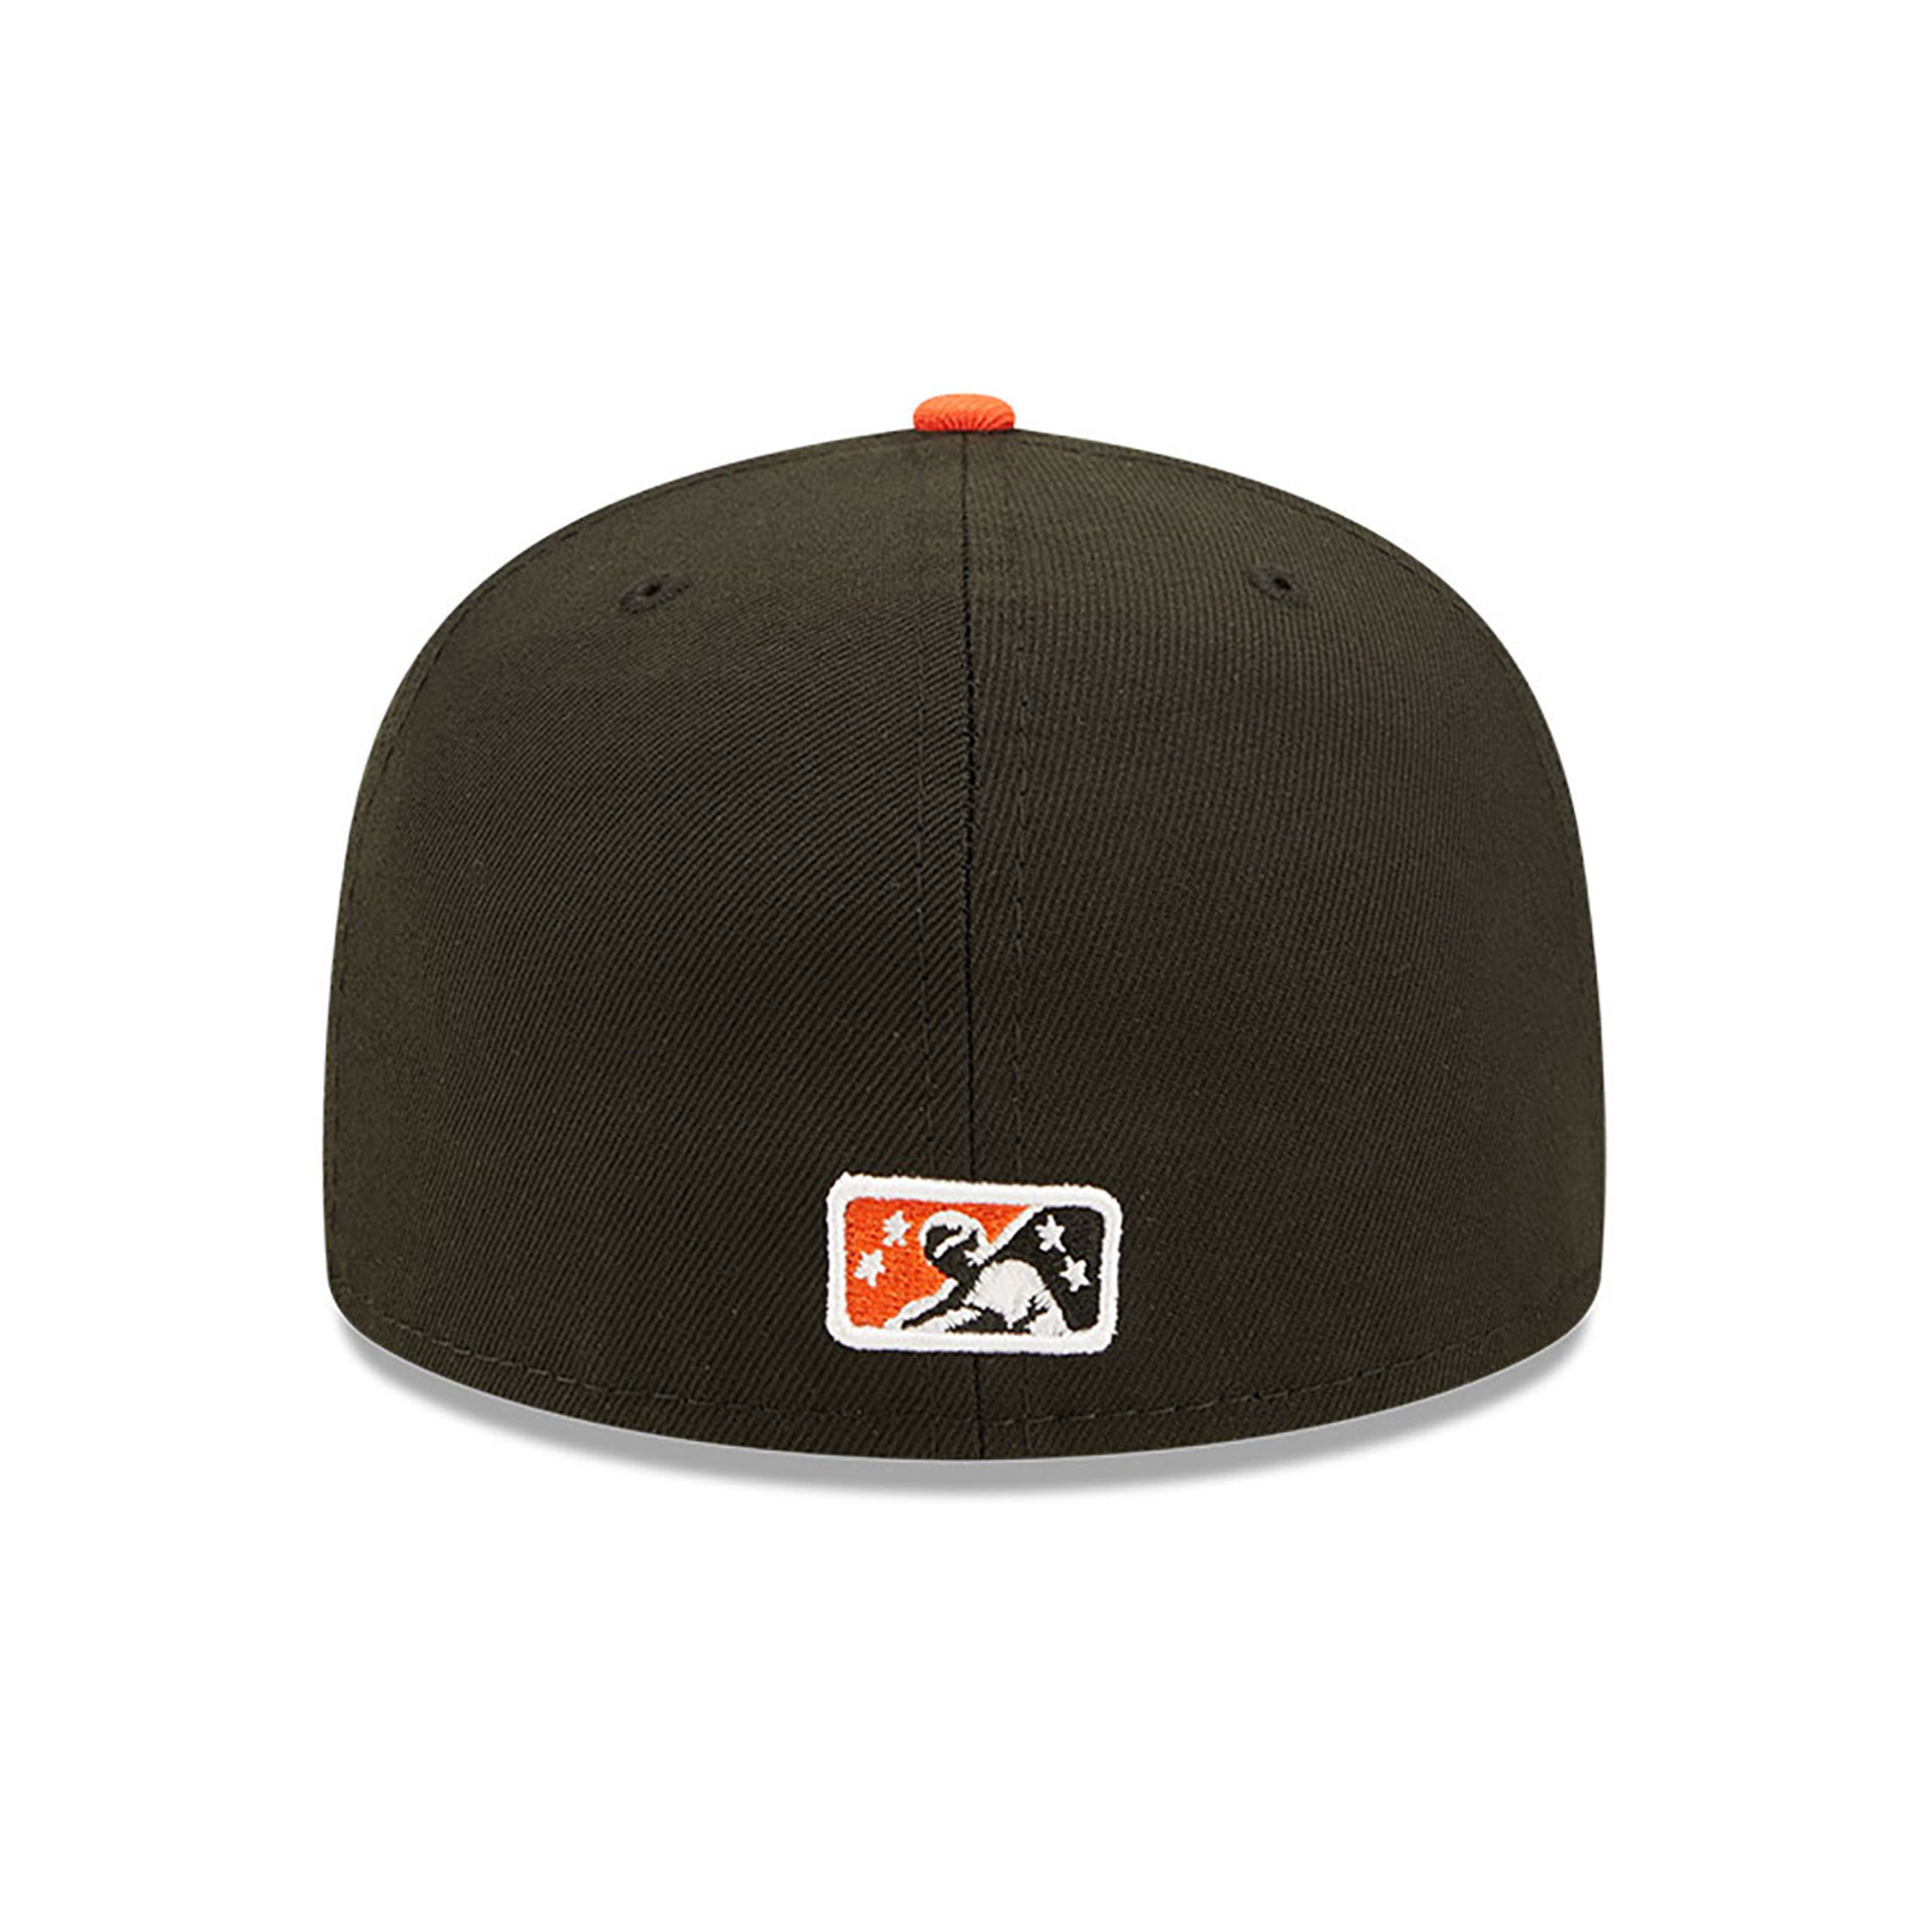 San Jose Giants MiLB On Field Black 59FIFTY Fitted Cap